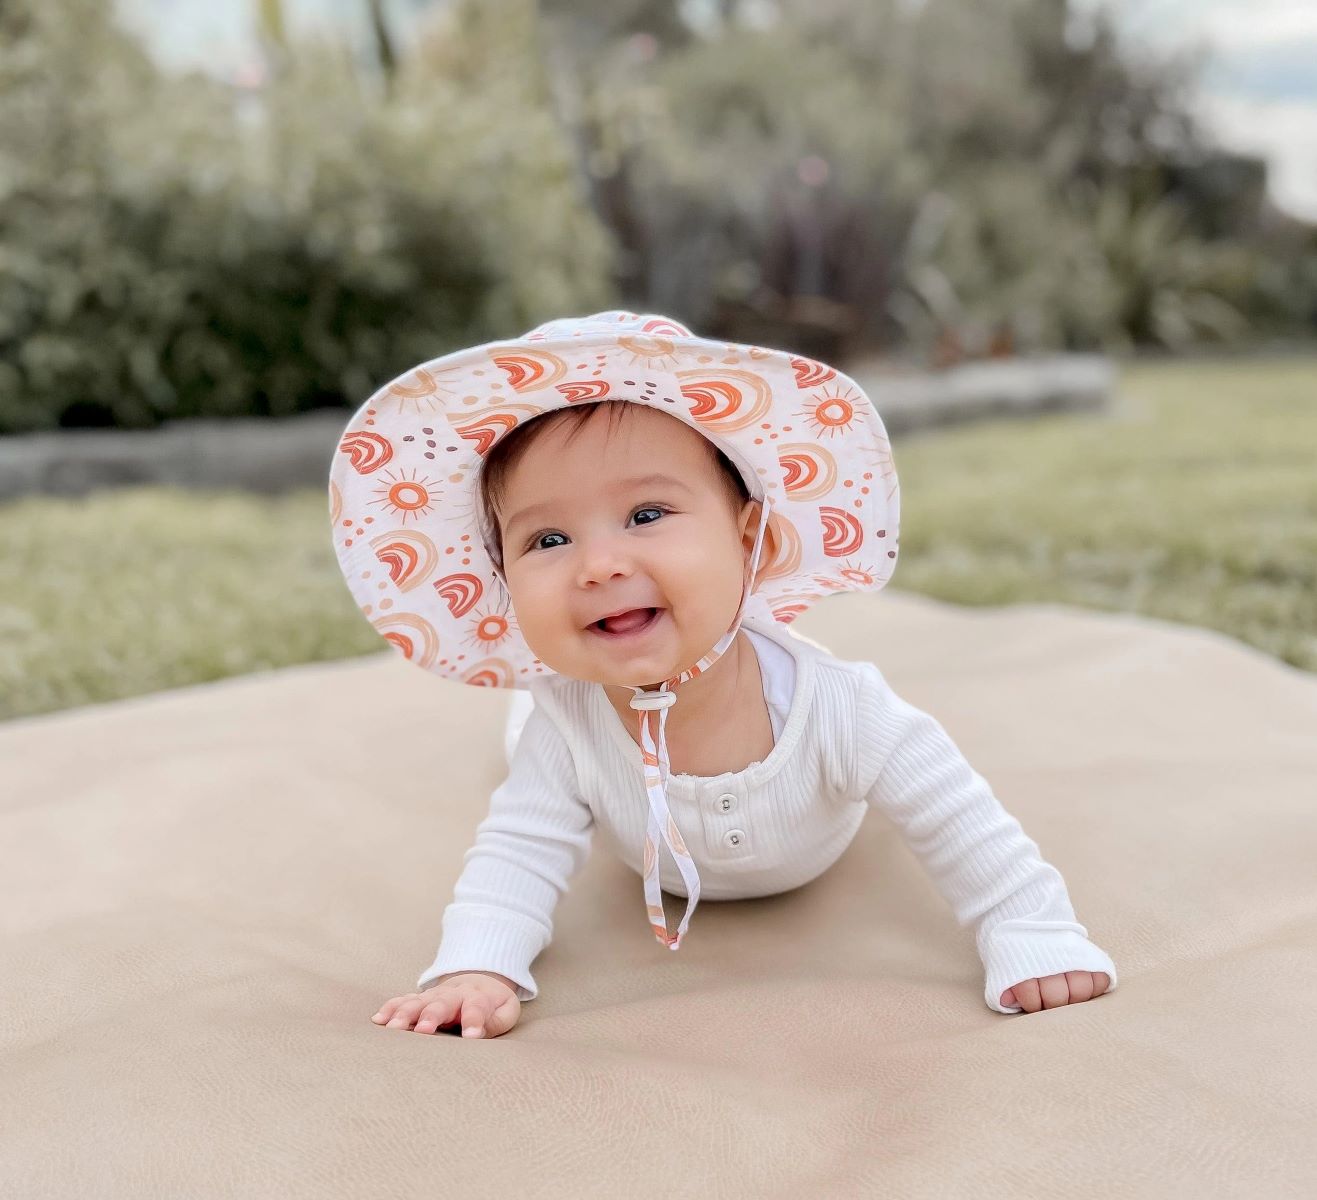 Review: Best Baby Sun Hat for Protection and Style